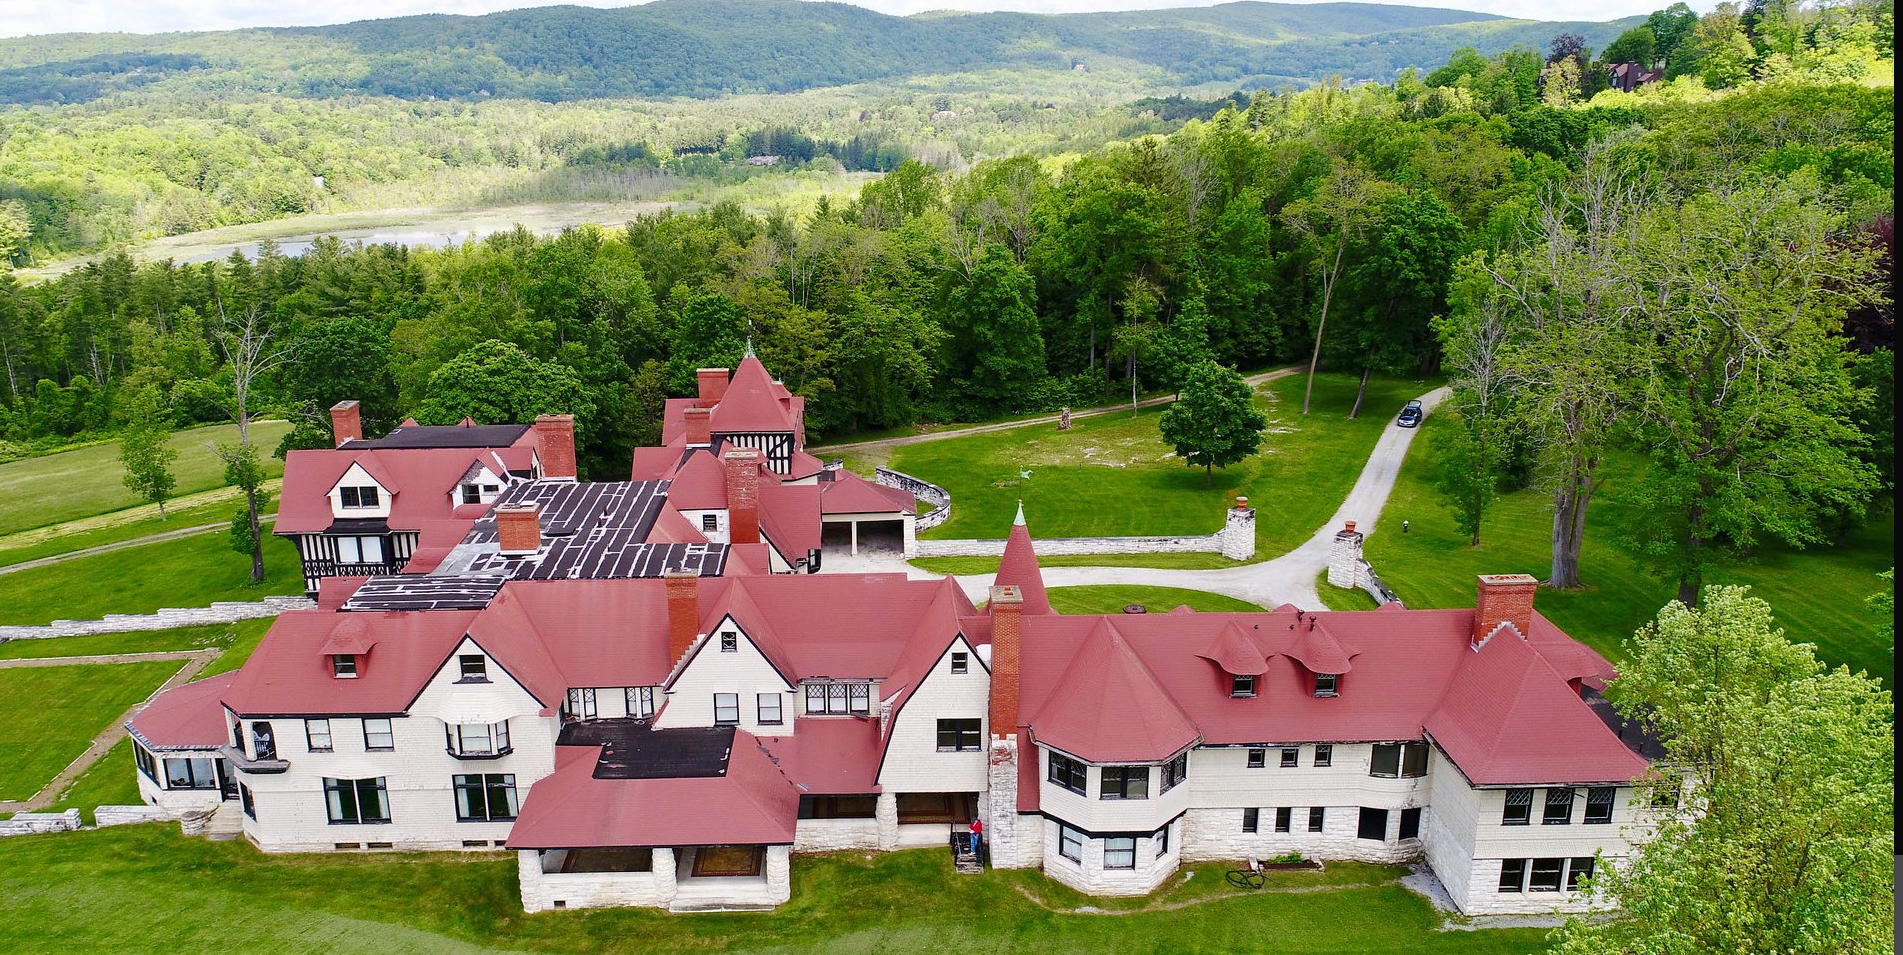 A view of a red-roofed Berkshires mansion with a myriad of rooflines and turrets. The walls are white, and the Berkshires hills are visible in the background.